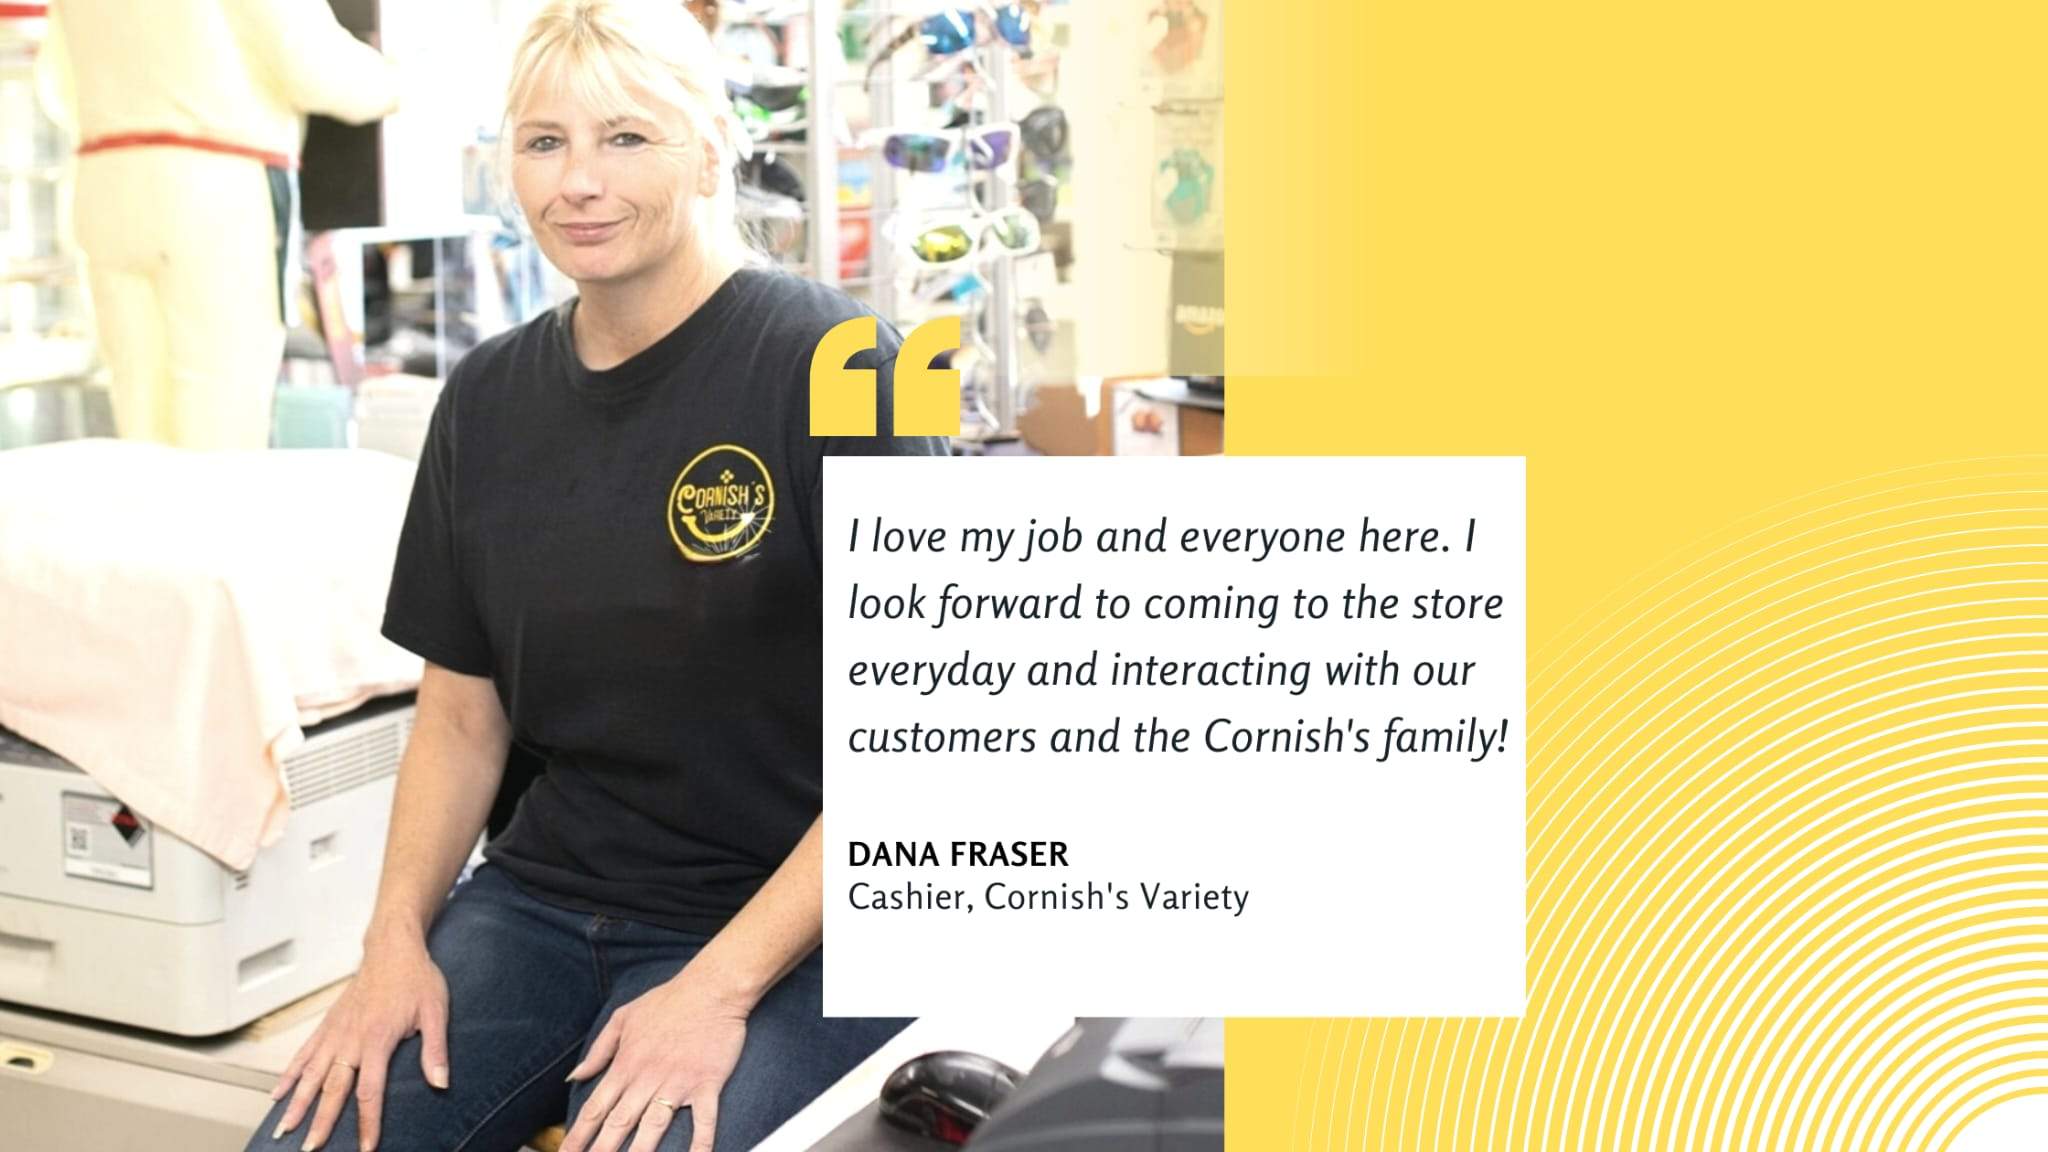 Testimonial Series – Interacting with Our Customers and the Cornish’s Family